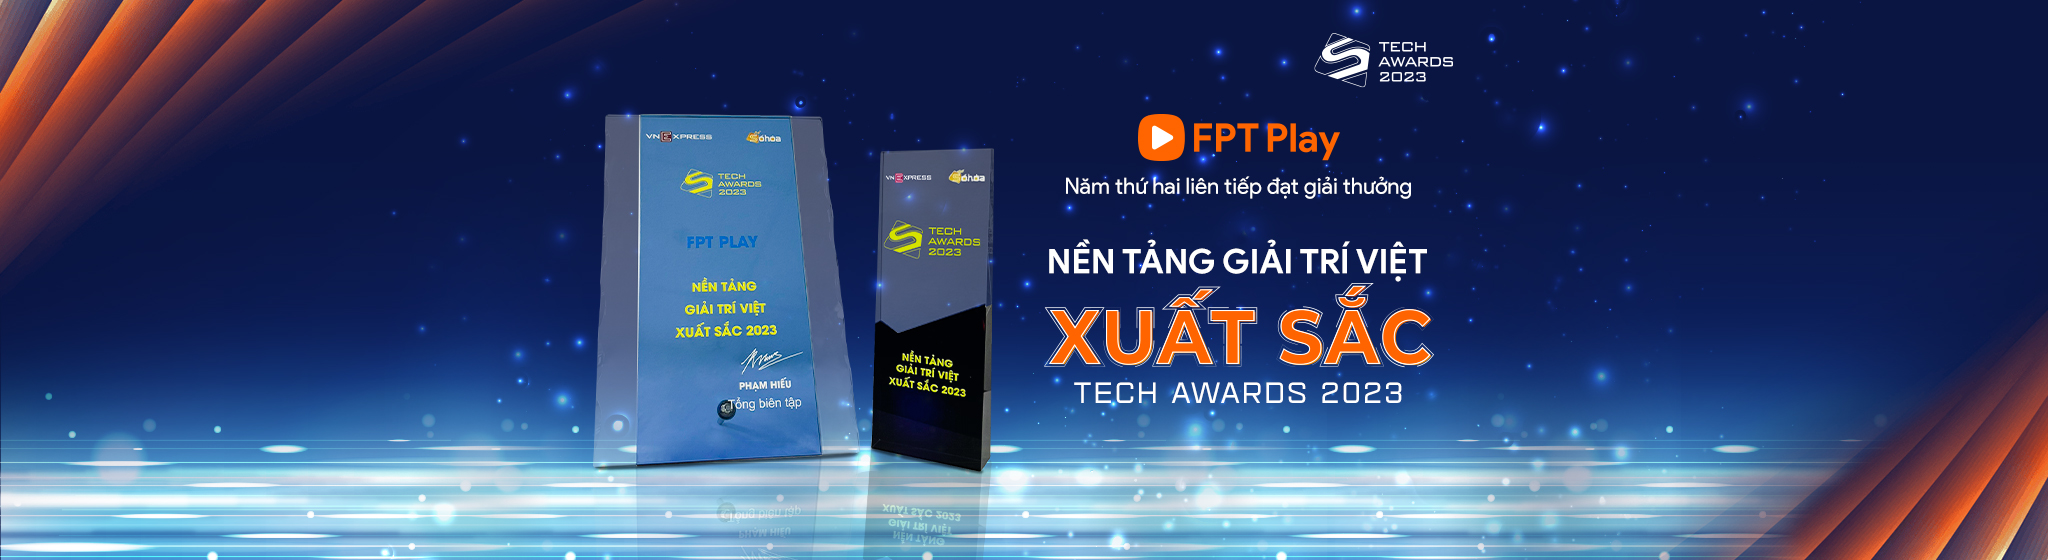 banner-fpt-techawards